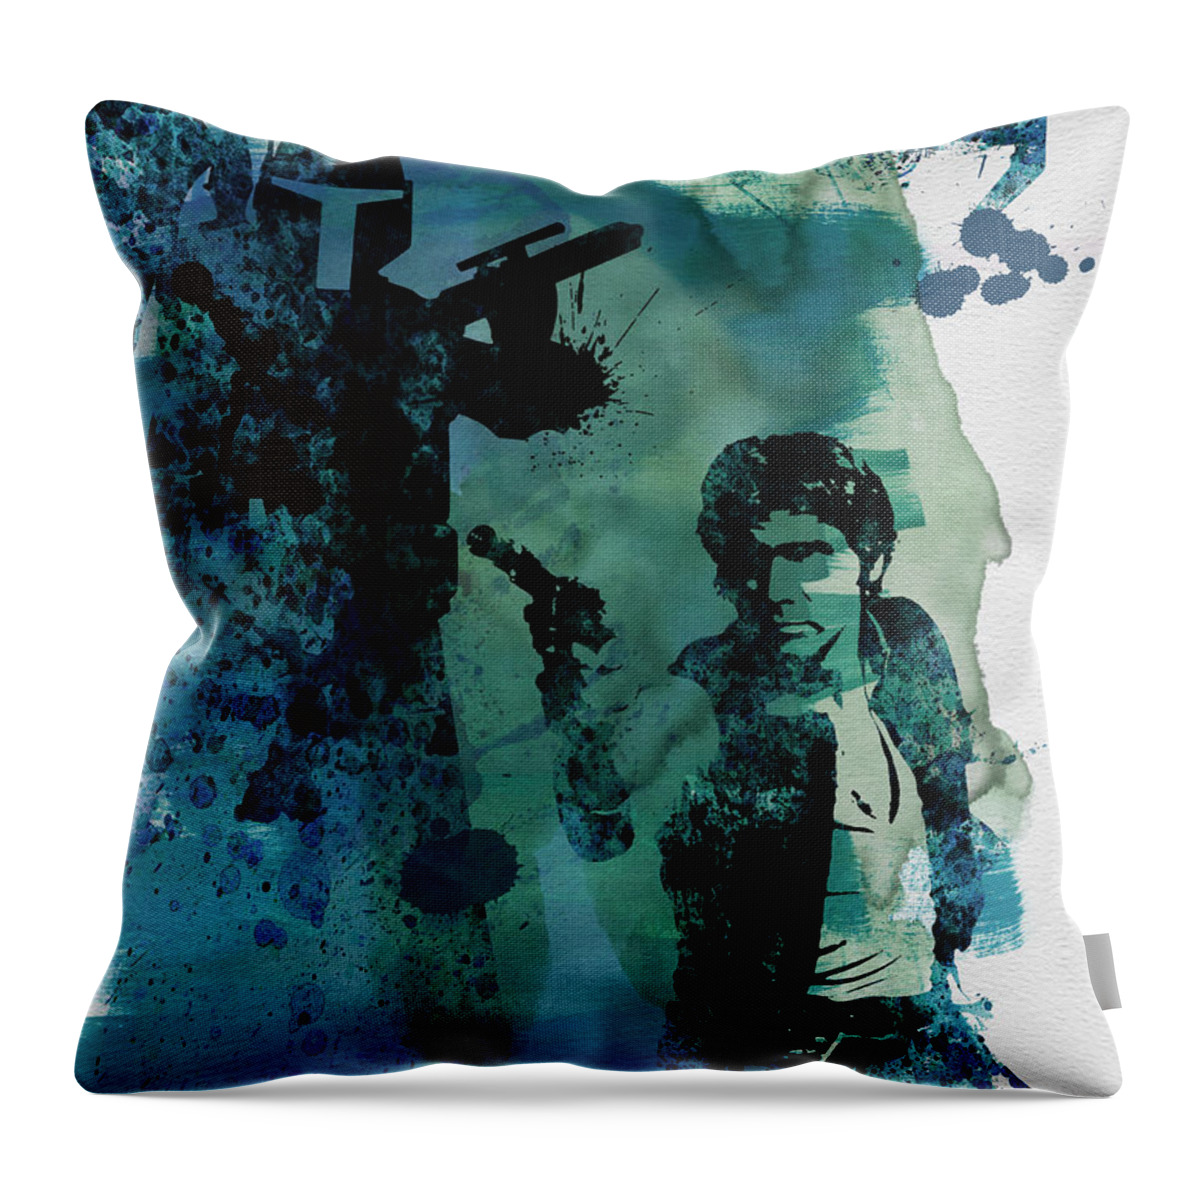 Star Throw Pillow featuring the painting Star Warriors Watercolor 2 by Naxart Studio